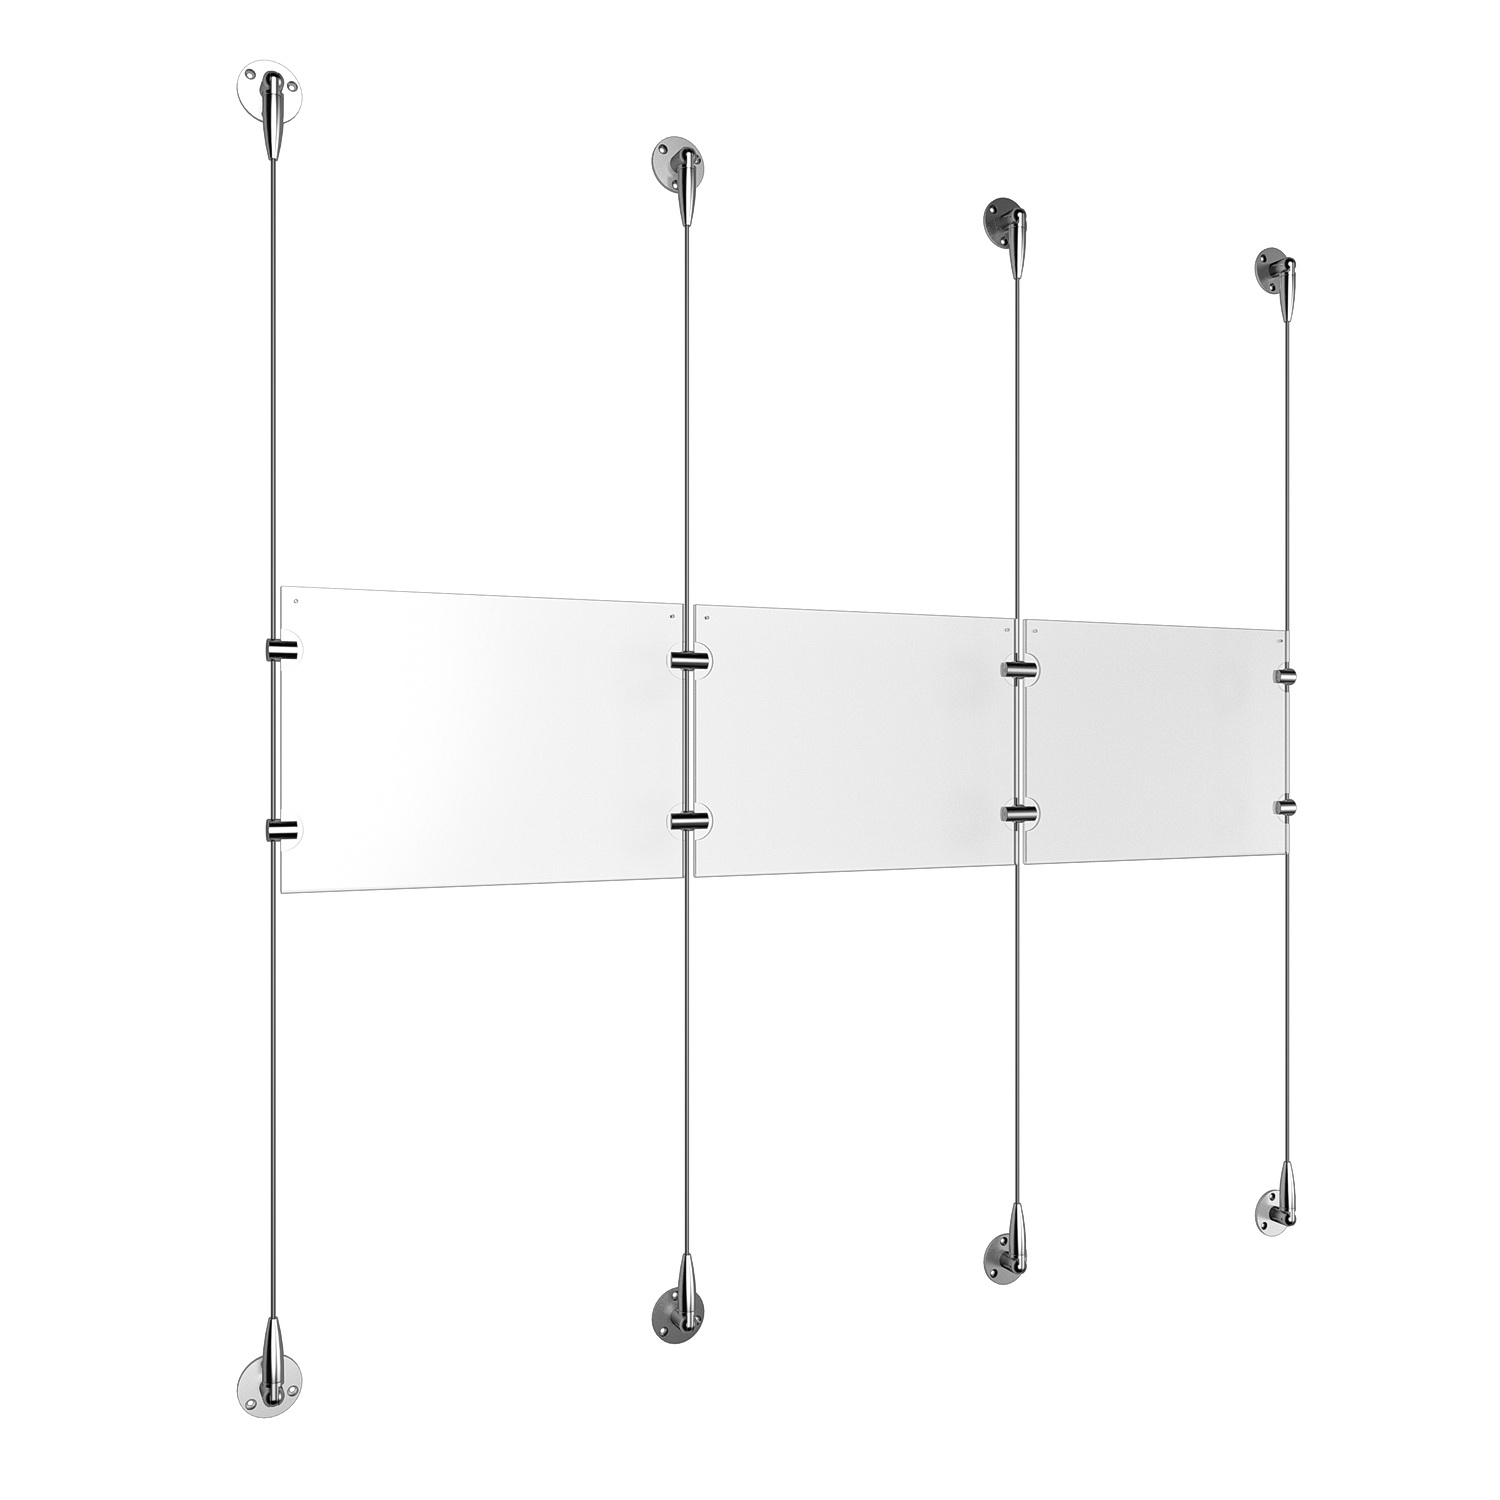 (3) 11'' Width x 8-1/2'' Height Clear Acrylic Frame & (4) Stainless Steel Satin Brushed Adjustable Angle Signature 1/8'' Cable Systems with (4) Single-Sided Panel Grippers (4) Double-Sided Panel Grippers